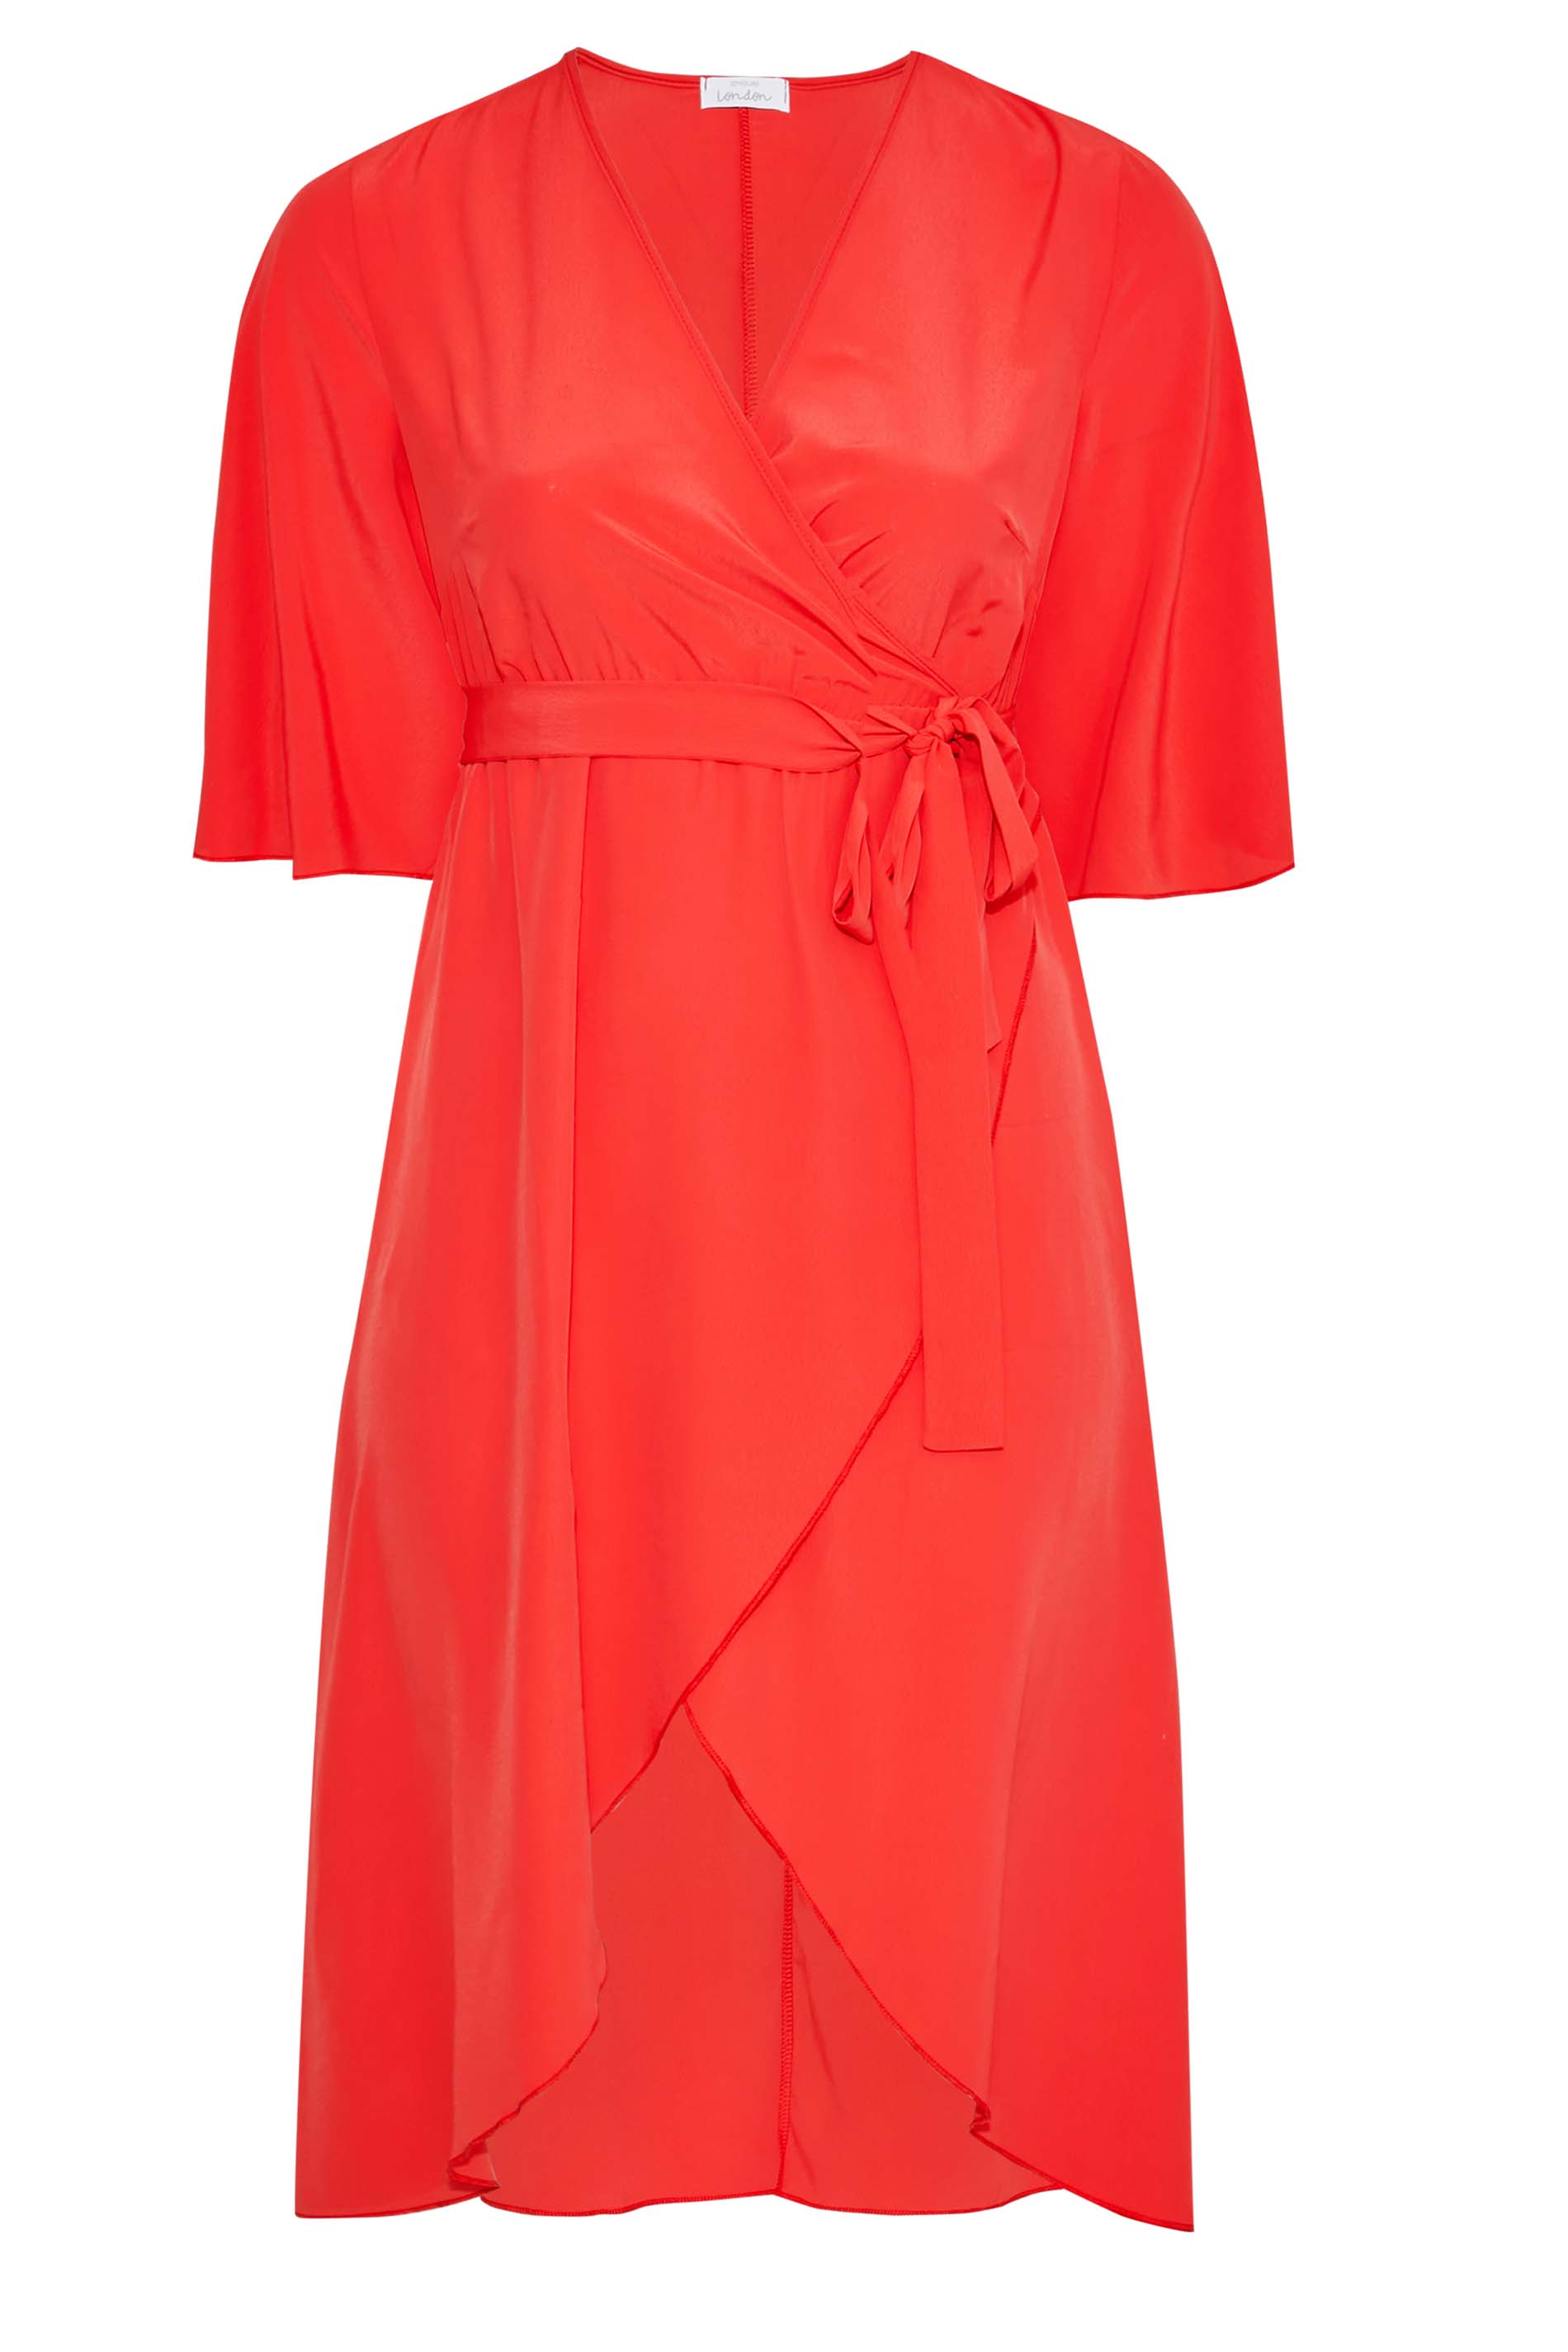 Robes Grande Taille Grande taille  Robes Portefeuilles | YOURS LONDON - Robe Rouge Coupe Portefeuille - ZF61653